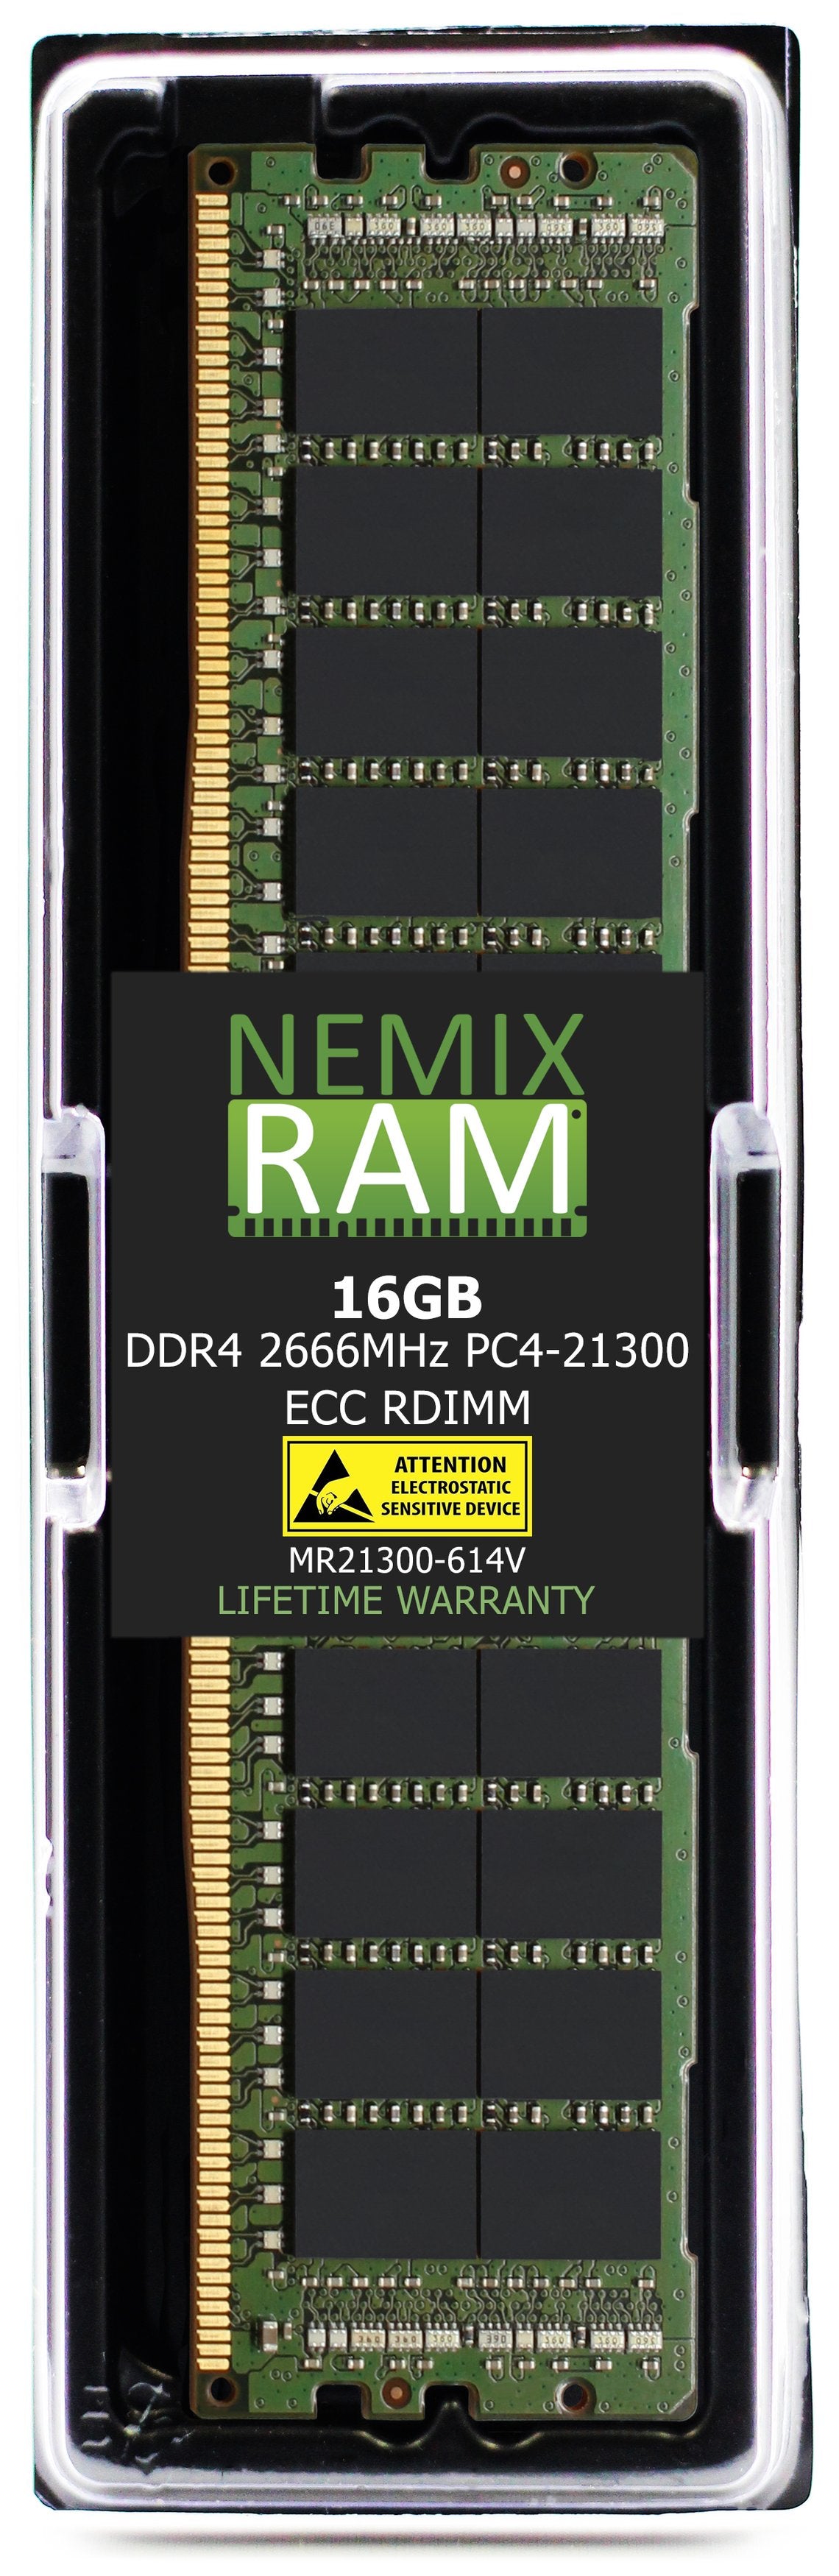 16GB DDR4 2666MHZ PC4-21300 VLP RDIMM Compatible with Supermicro MEM-DR416MB-ER29